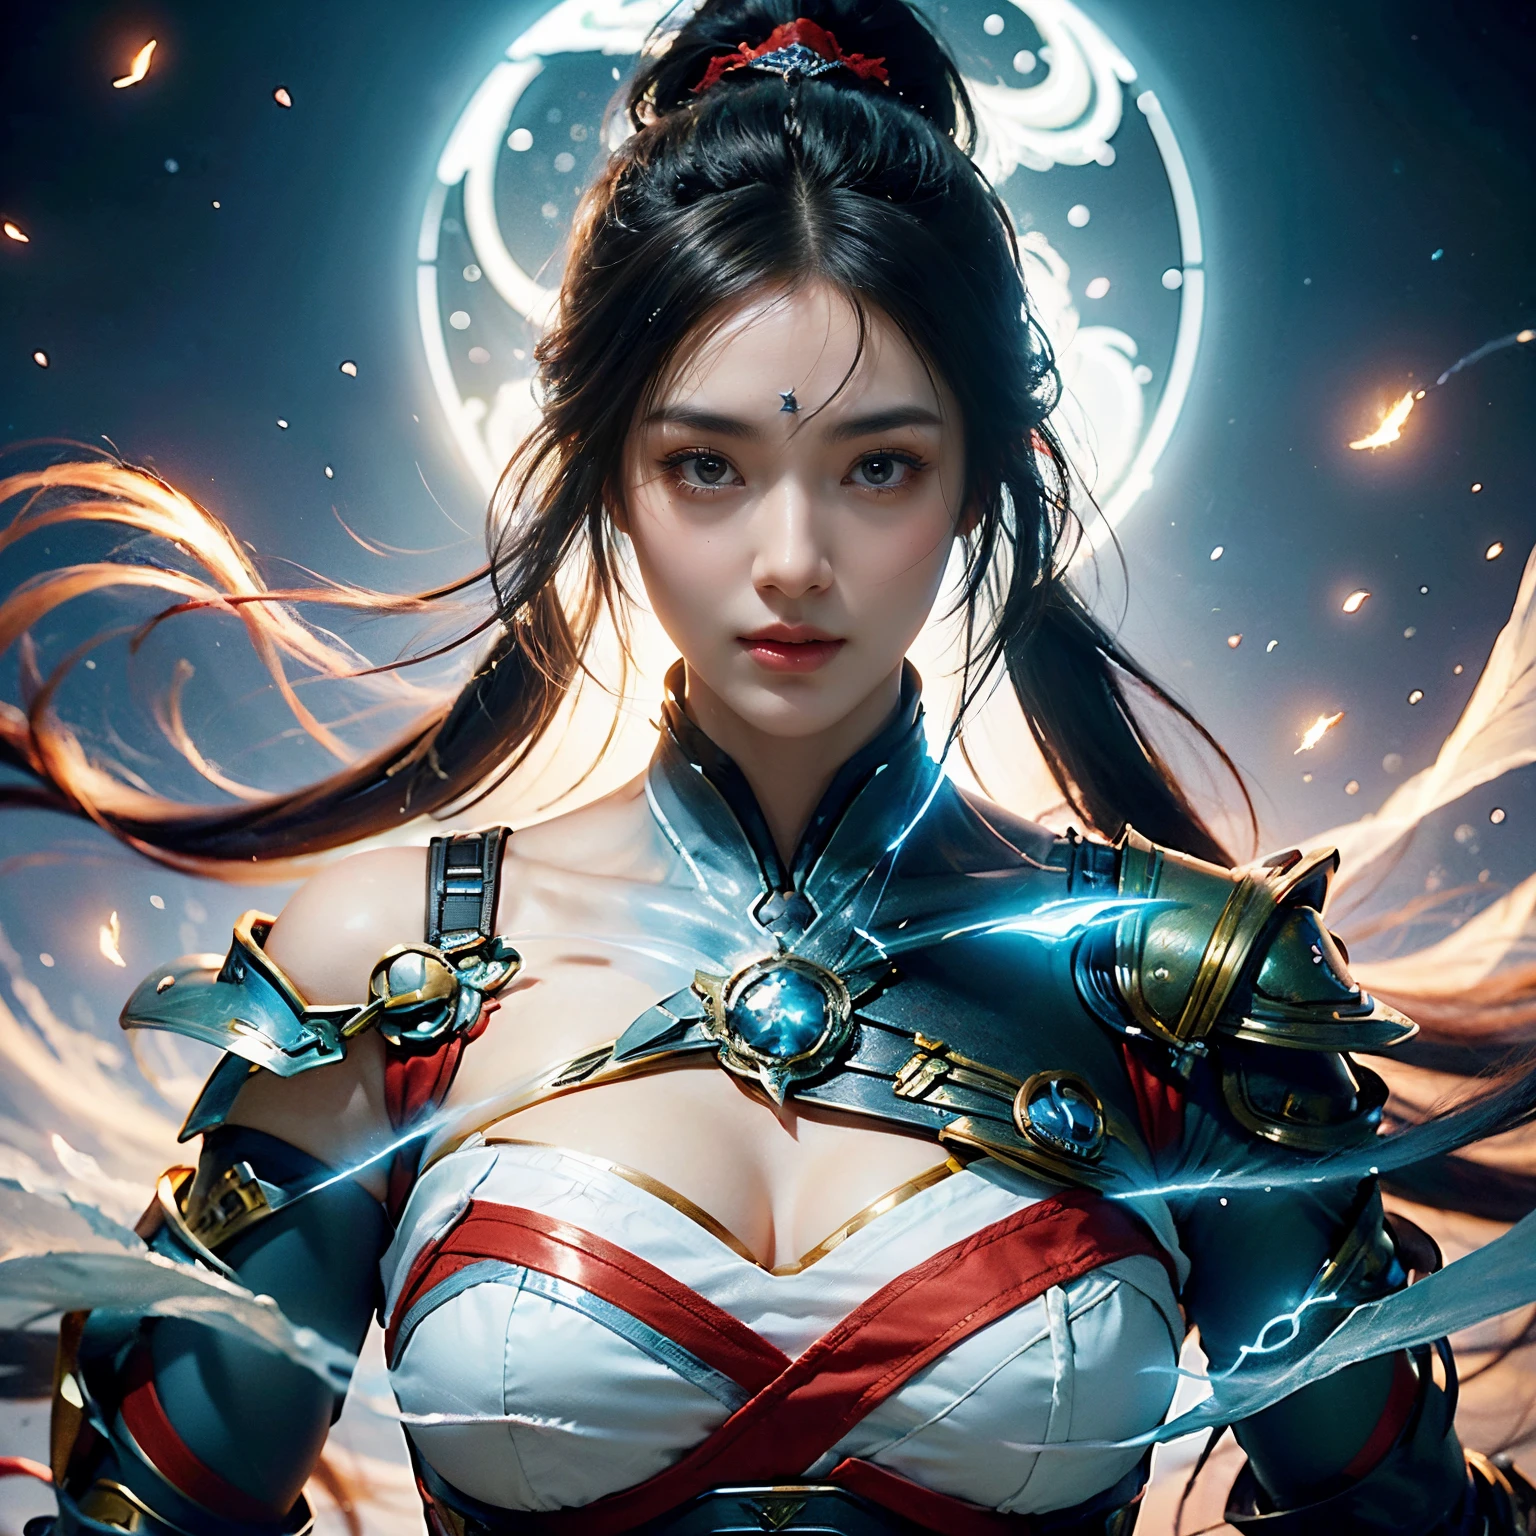 A style that combines ancient times with science fiction,ChineseGirl,20yr old,researcher,Long ponytail hairstyle,black color hair,red eyes,A plump chest,Open white coat,red pattern,Red suspender underwear,liner,scantily clad,Shoulders bare,bare abdomen,scholar clothing,joint armor,close your mouth,hands unfolded,Expand the pose,Hand hidden,elegant and charming,Calm and serious,heroic look,(avatar close up),(Avatar photo),(head portrait),Futuristic fantasy,ancient fantasy,Lab scenario,inside a room,Electromechanical robot,Futuristic tech style,cyber punk personage,hyper realisitc,8K